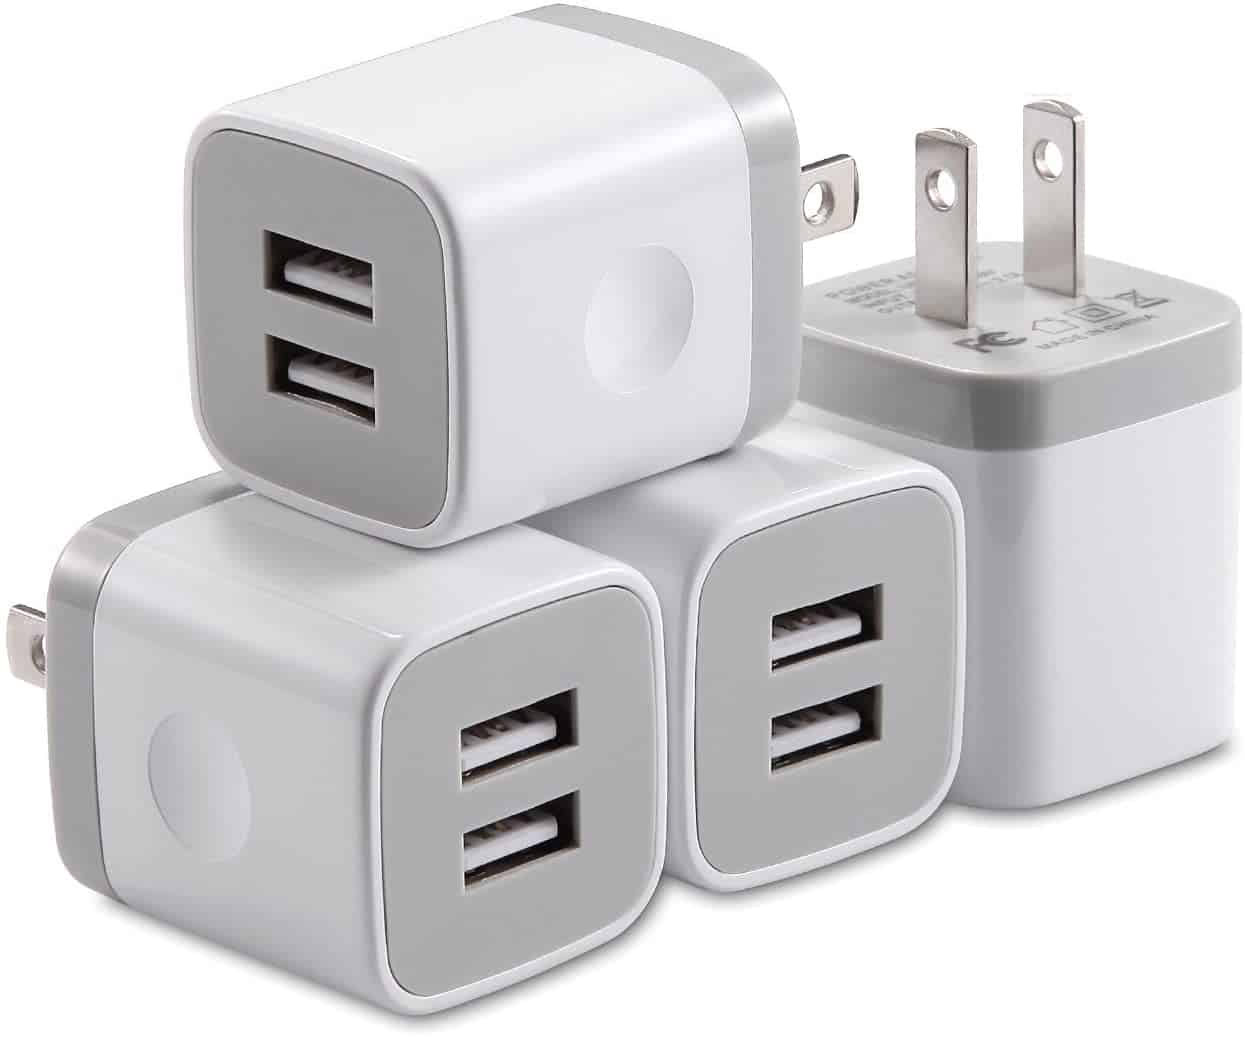 7 Best USB Charger Cubes in 2023